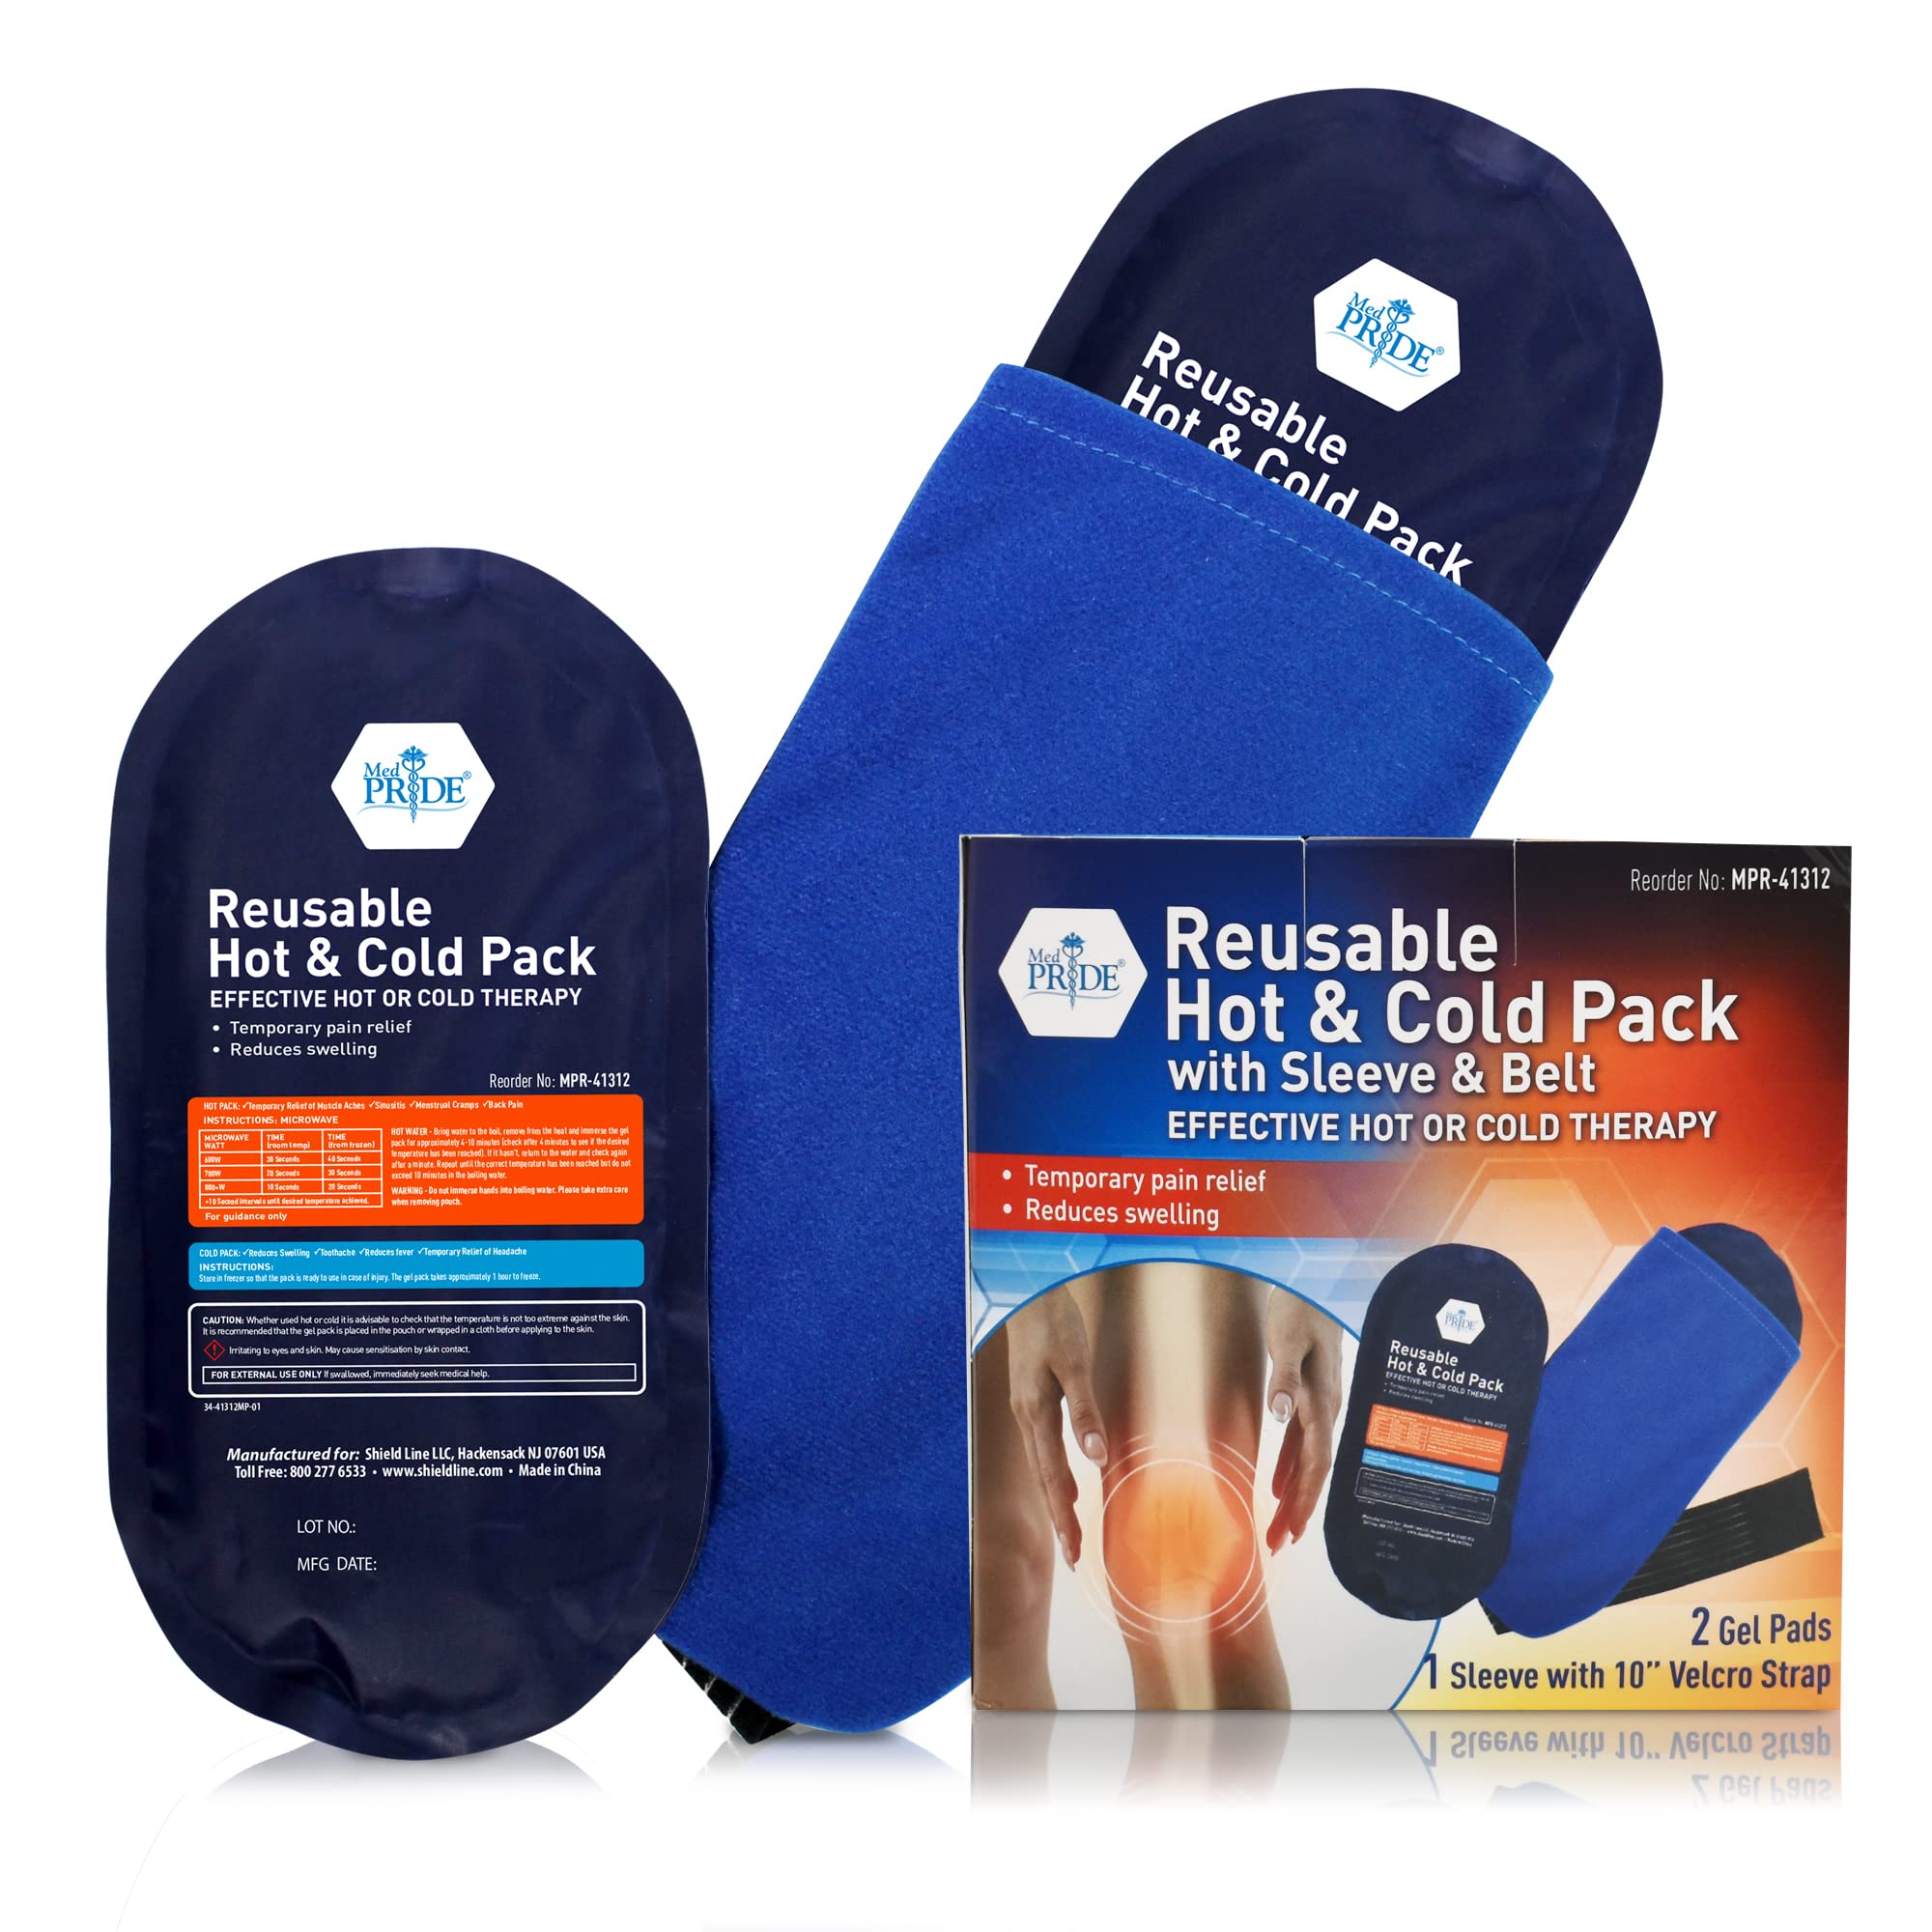 MED PRIDE Reusable Hot and Cold Packs with Sleeve and Belt 2 Gel